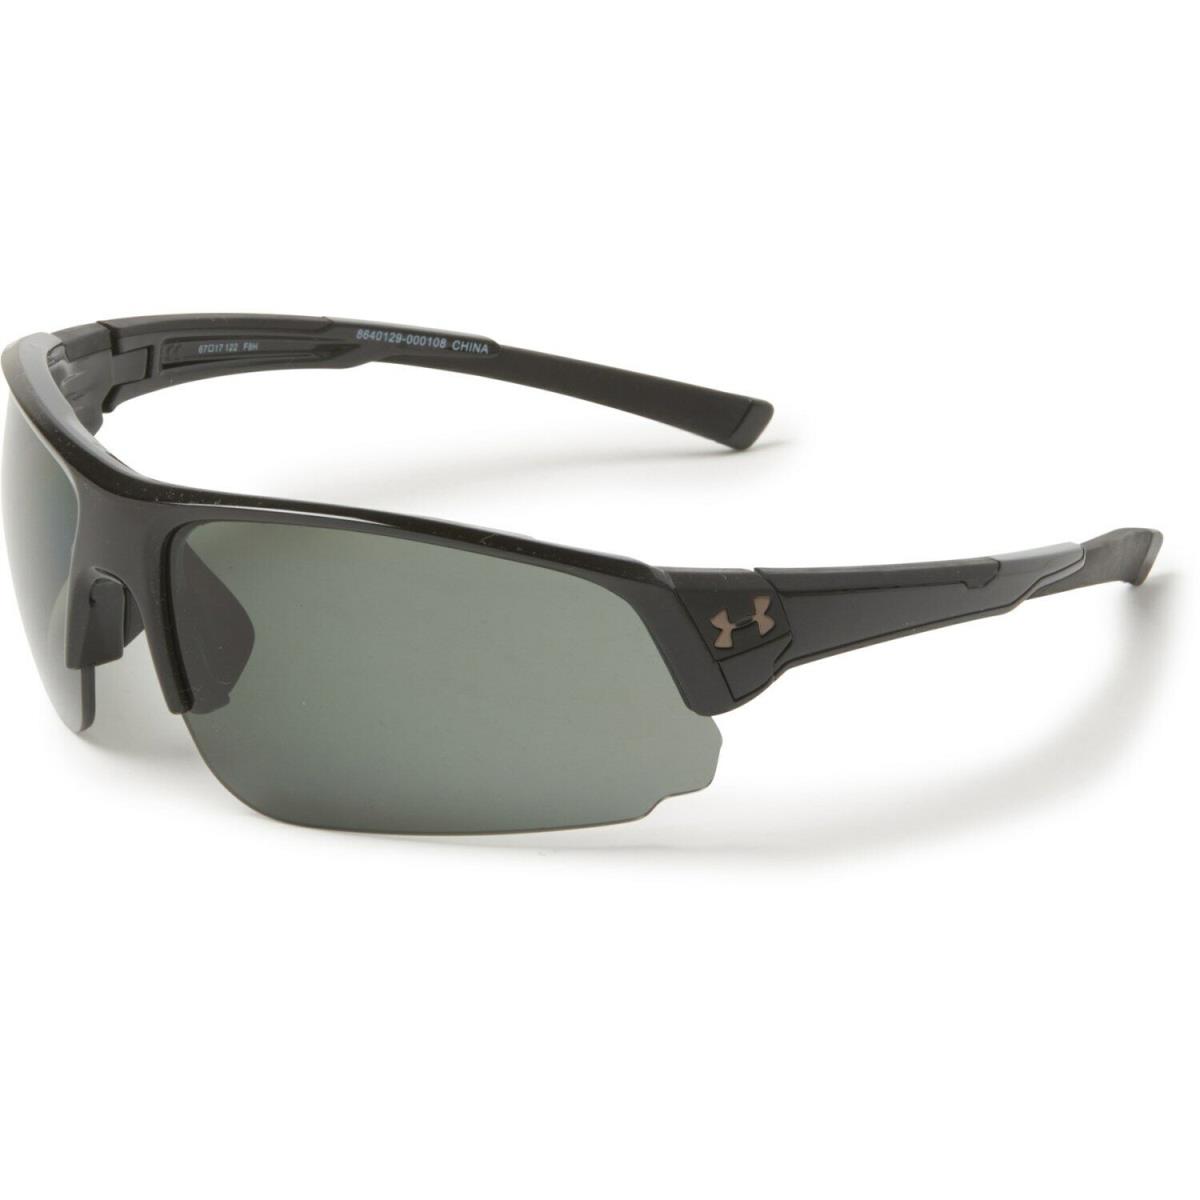 Under Armor Changeup Dual Sunglasses - Polarized